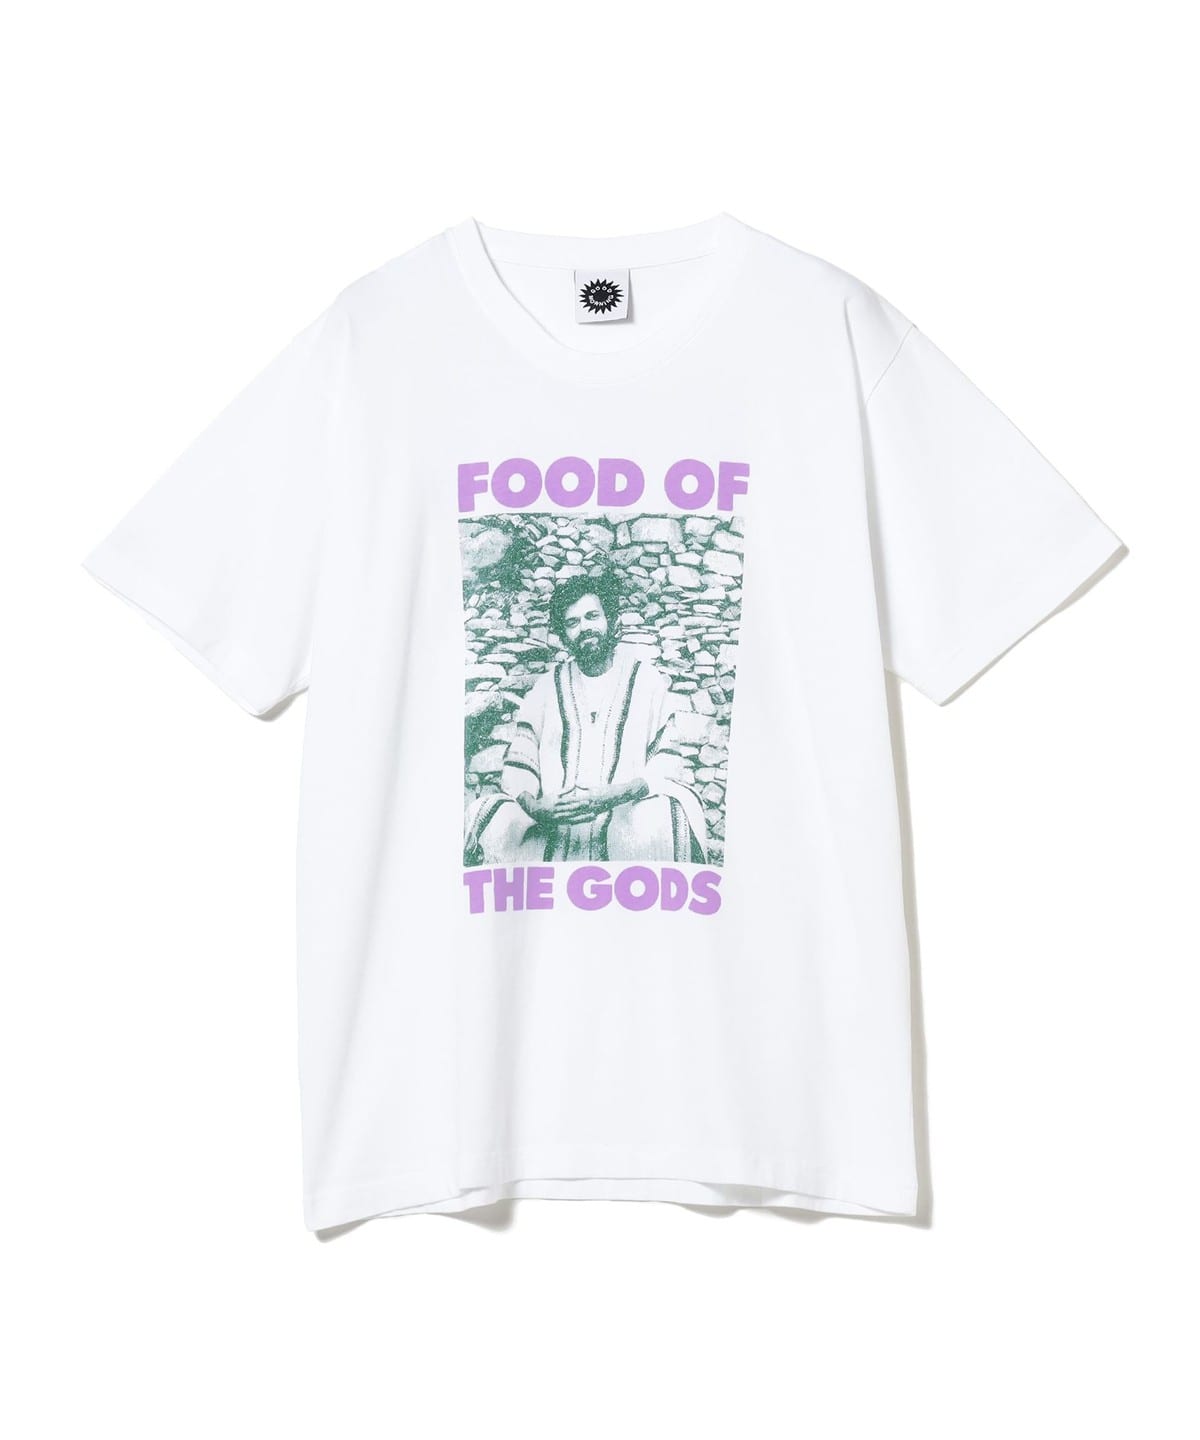 BEAMS T（ビームスT）Good Morning Tapes / FOOD OF THE GODS TEE（Tシャツ・カットソー プリントTシャツ ）通販｜BEAMS